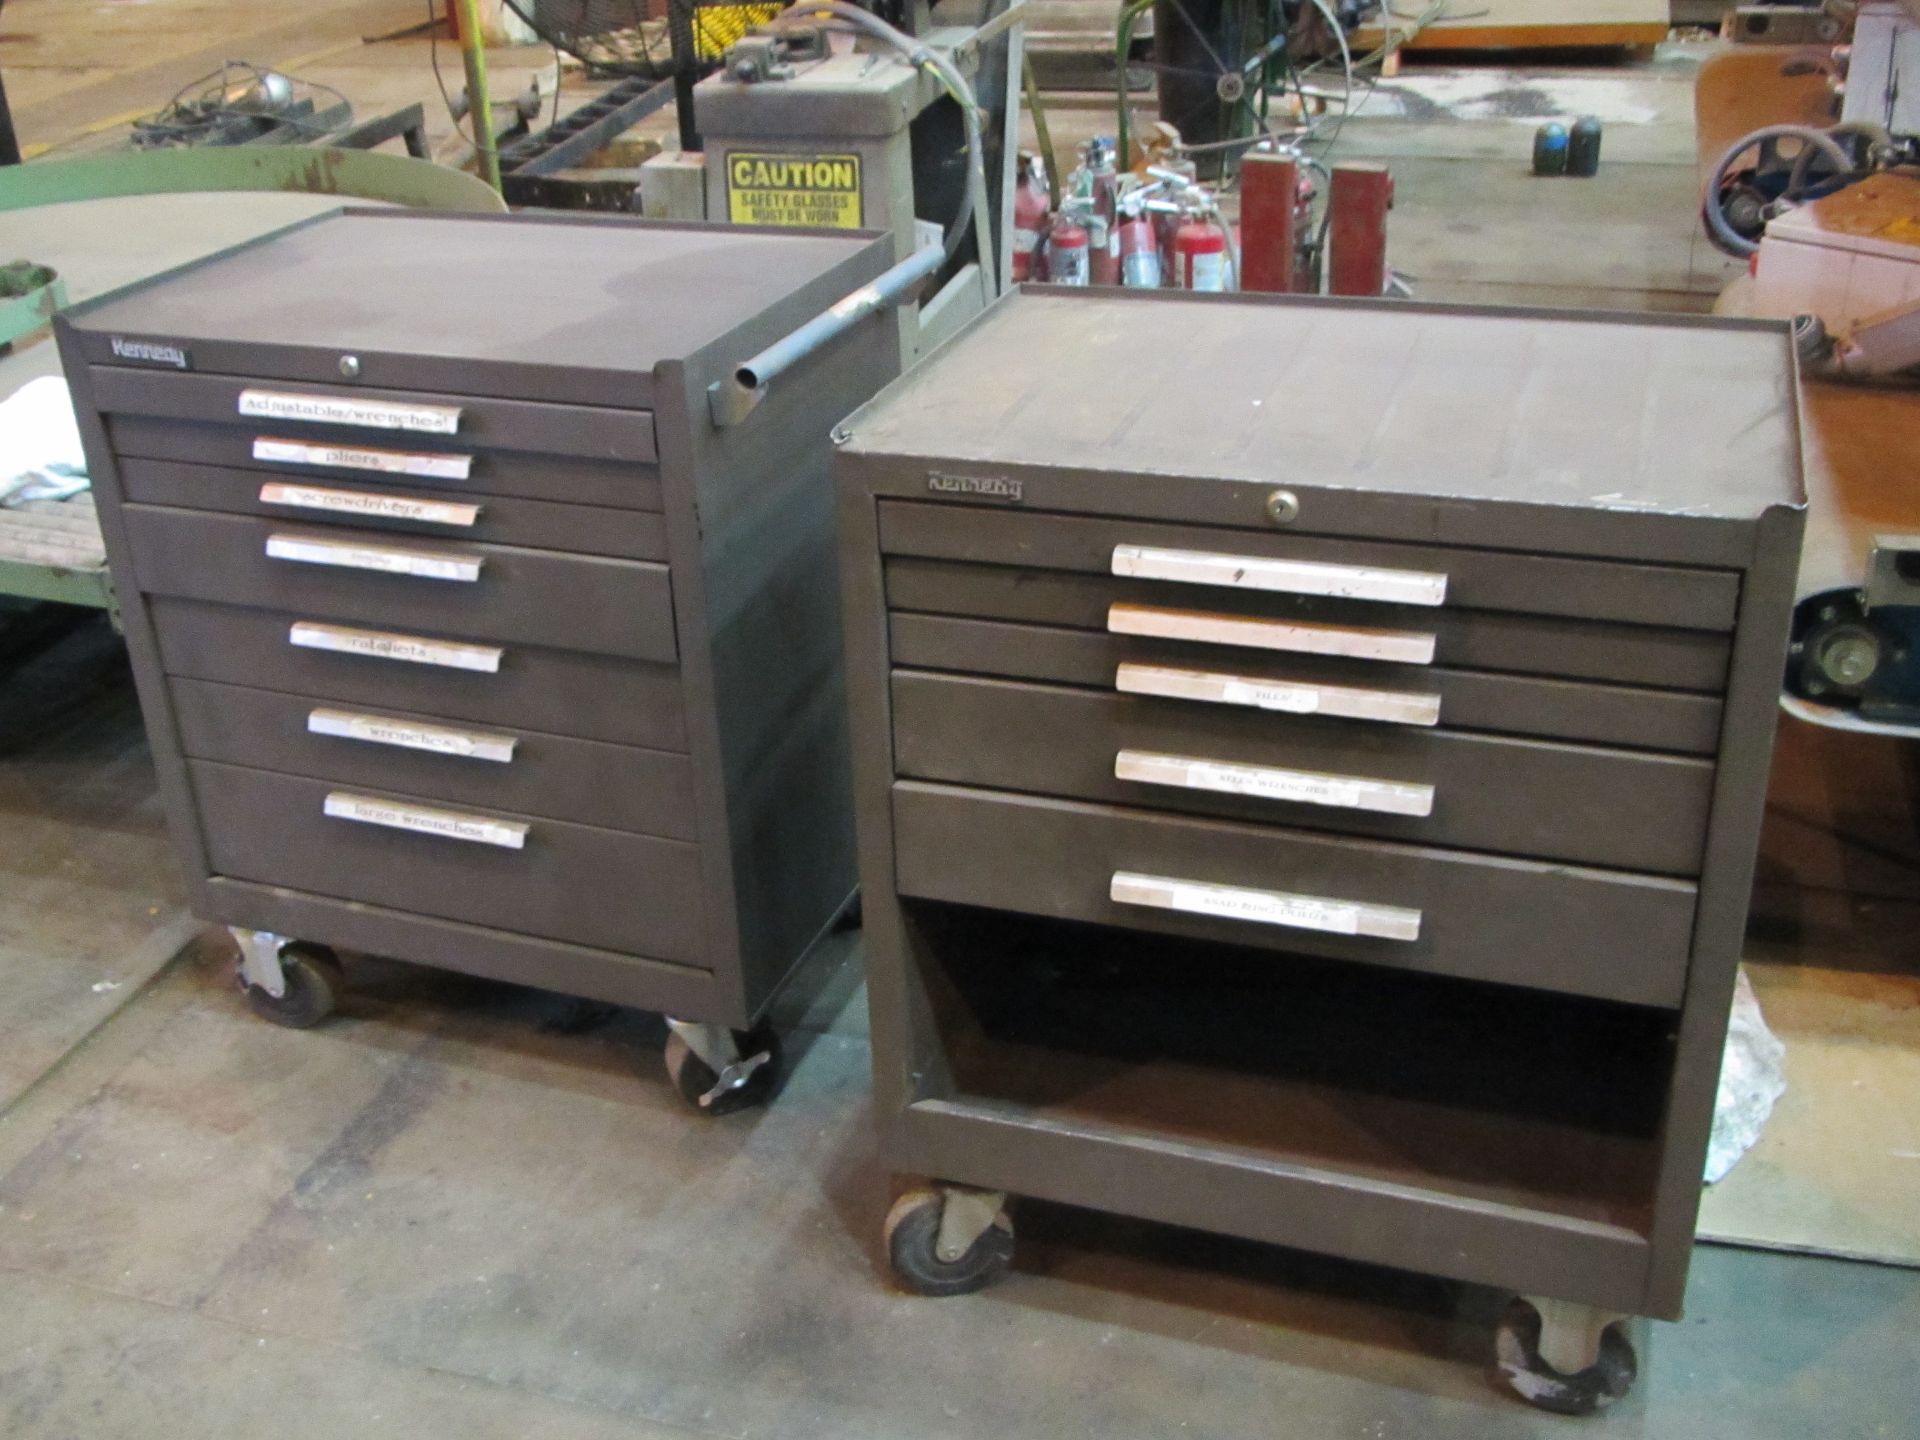 Lot of 2 Kennedy Toolboxes (IW7)